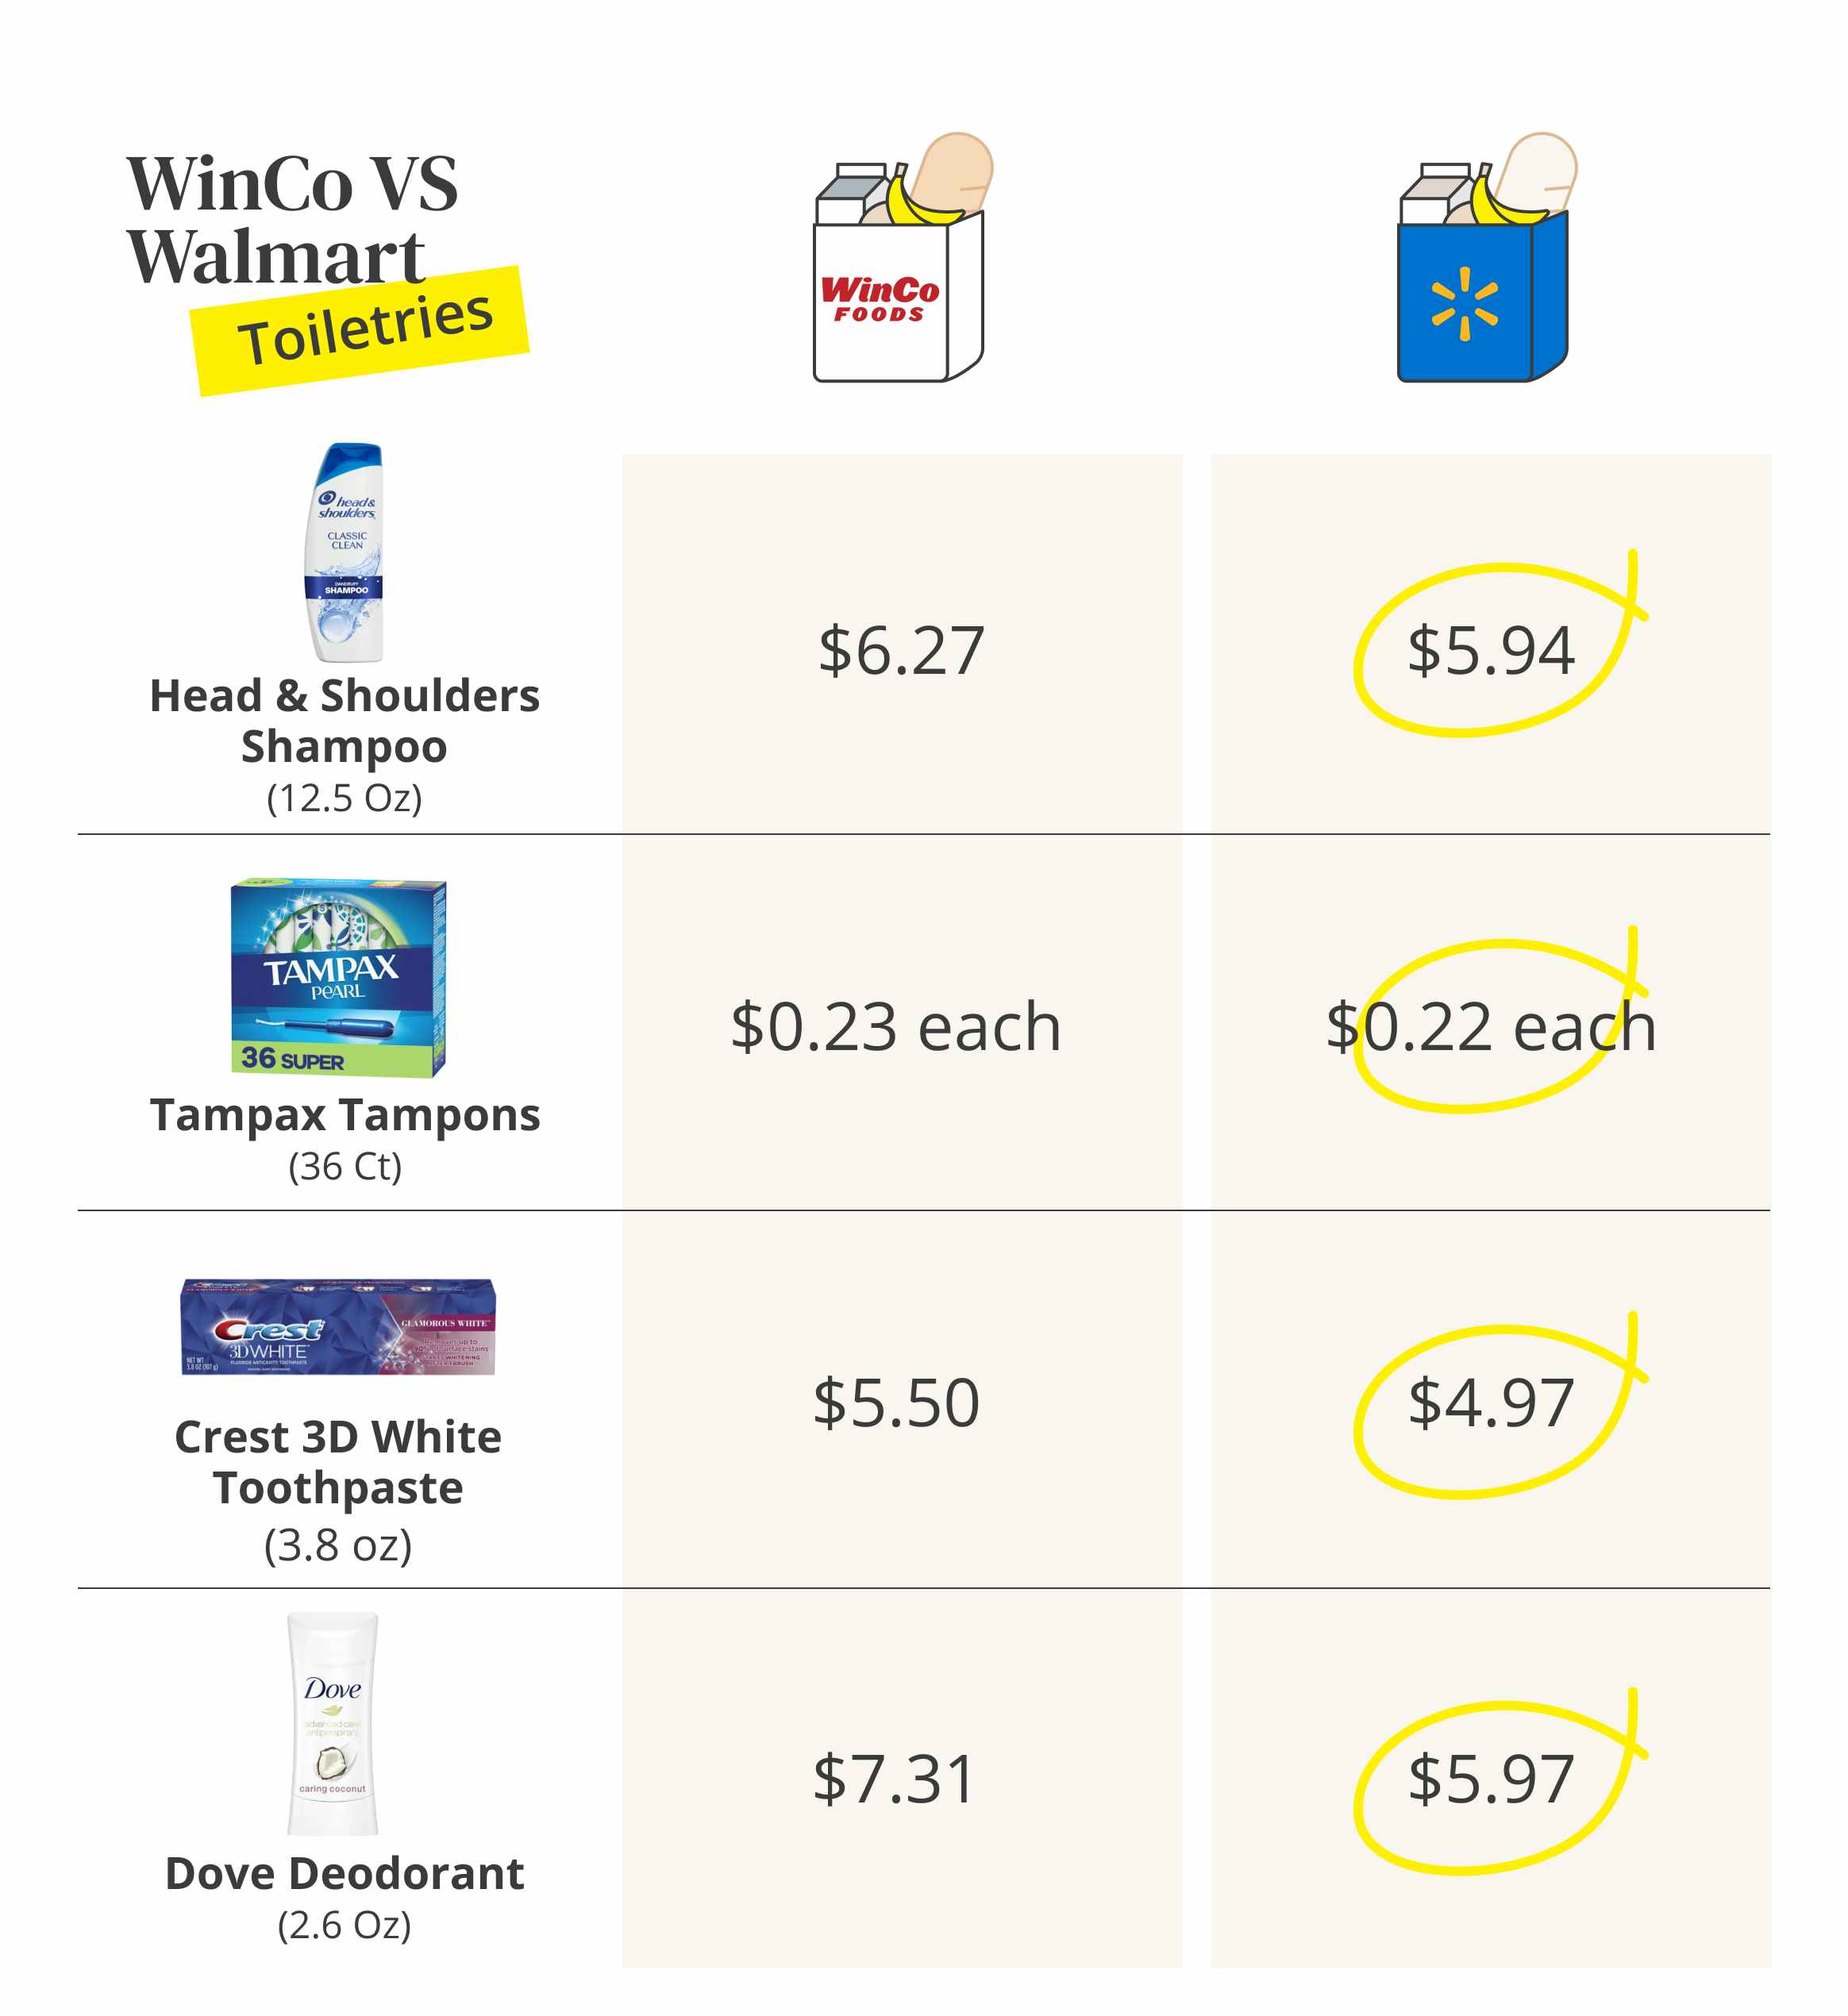 How WinCo prices compare to Walmart prices for toiletries.